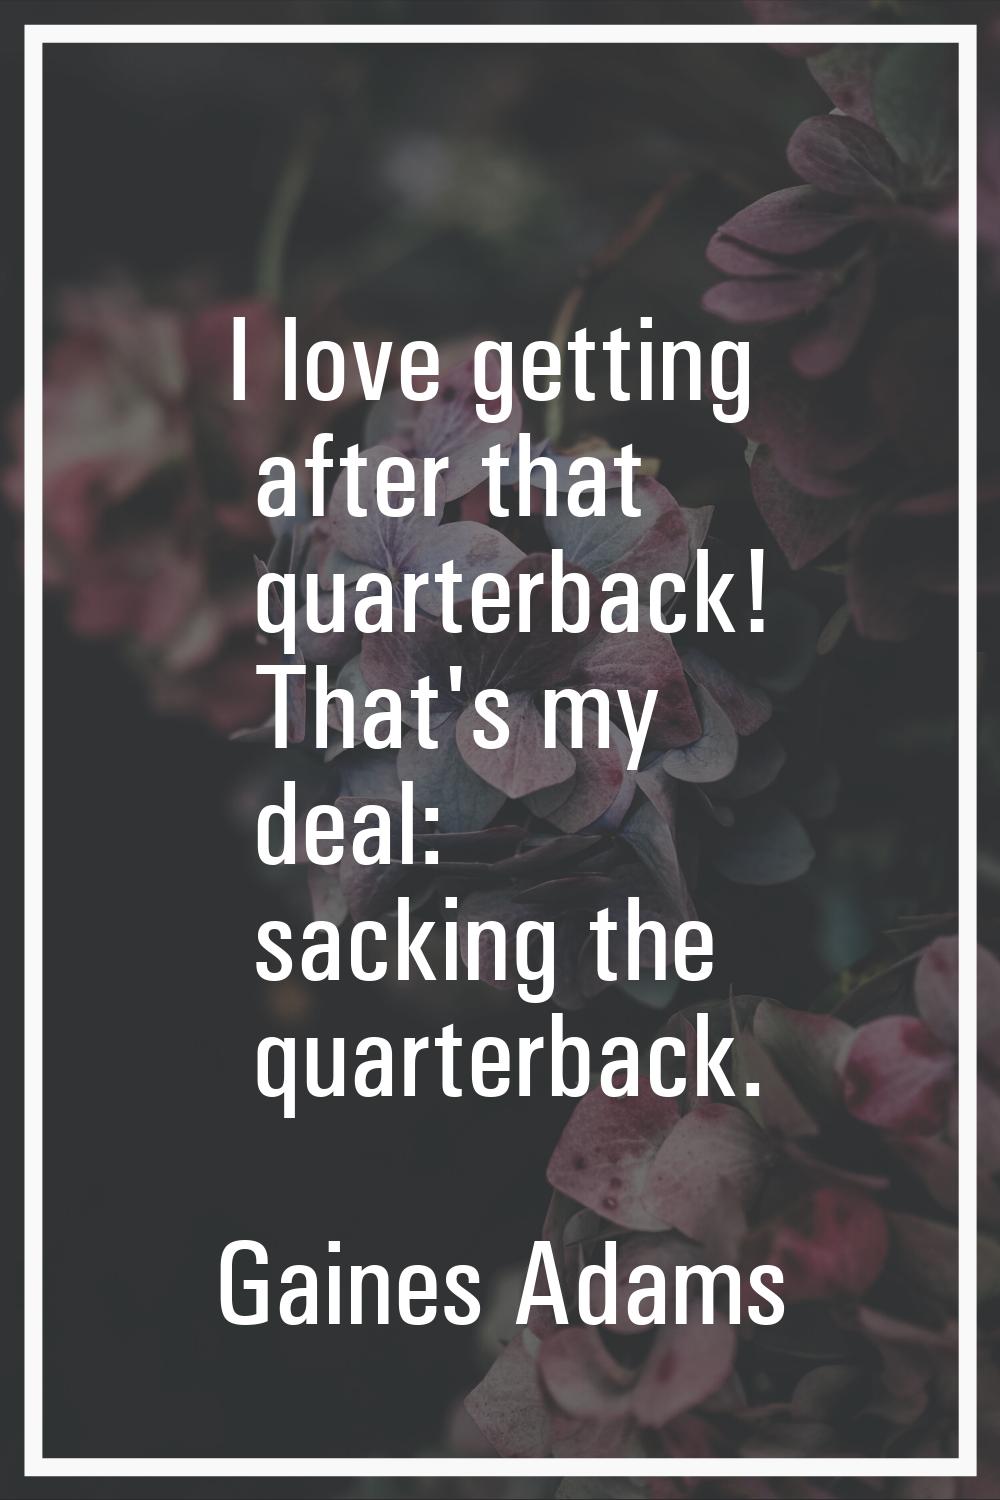 I love getting after that quarterback! That's my deal: sacking the quarterback.